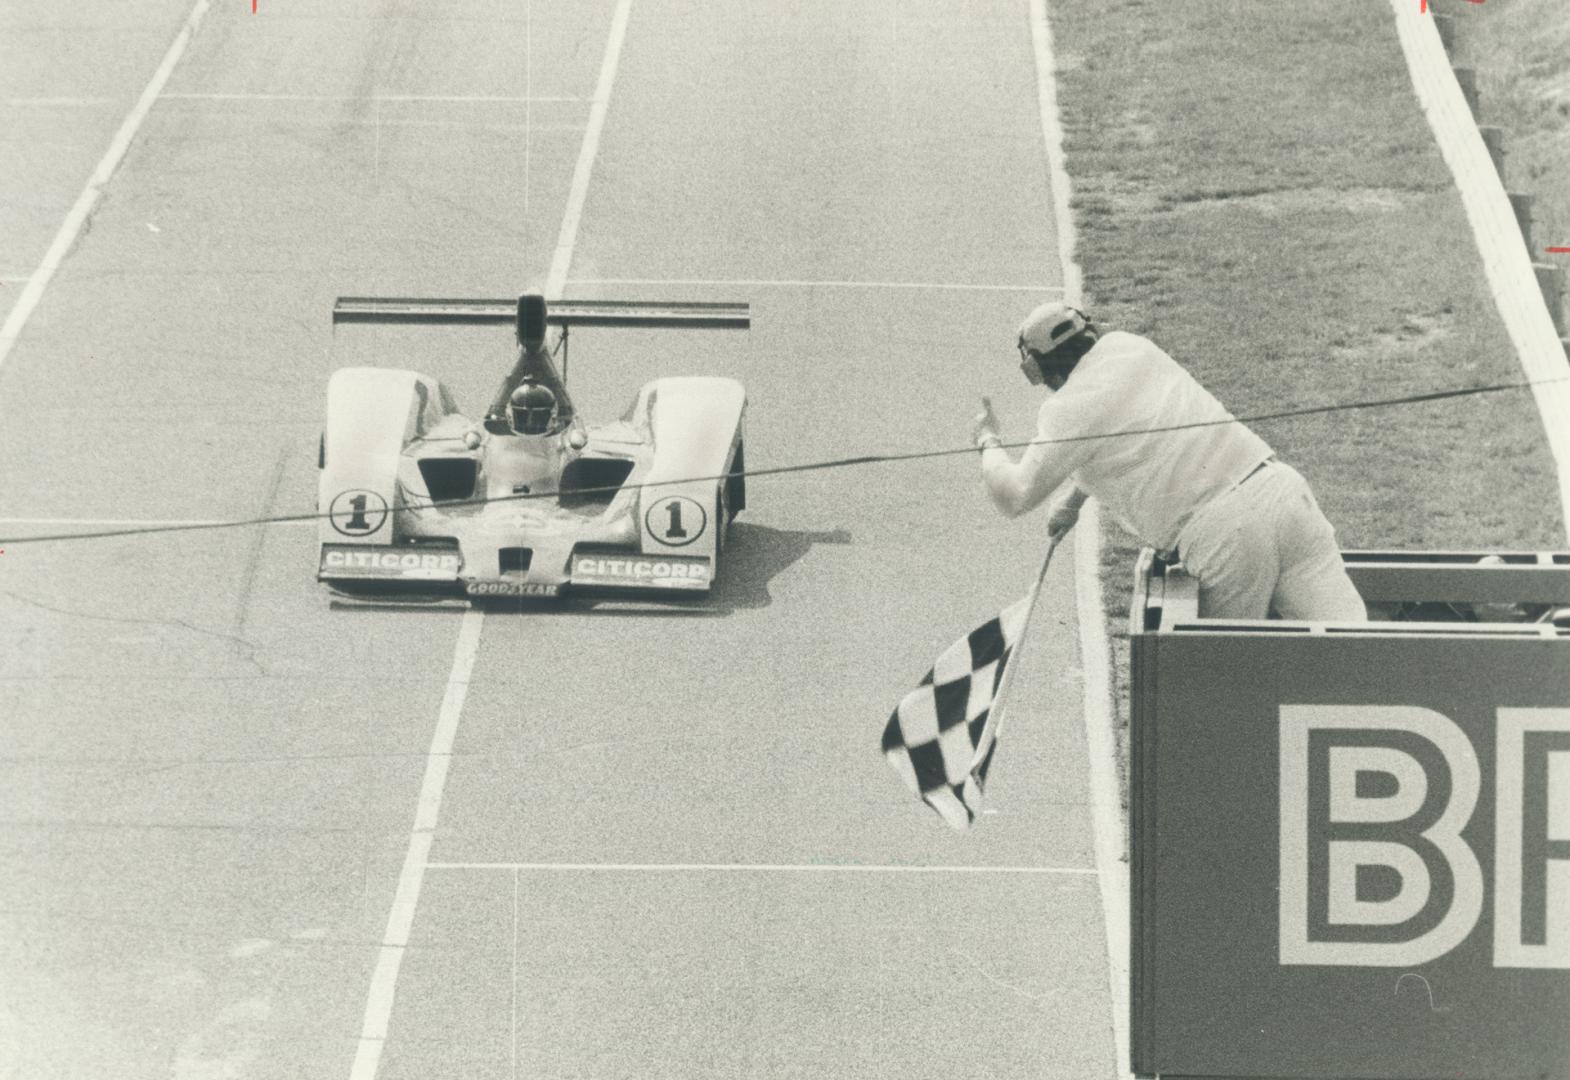 Jacky Ickx: driving No. 1 car, gets signal from official that he has won yesterday's Can-Am race at Mosport